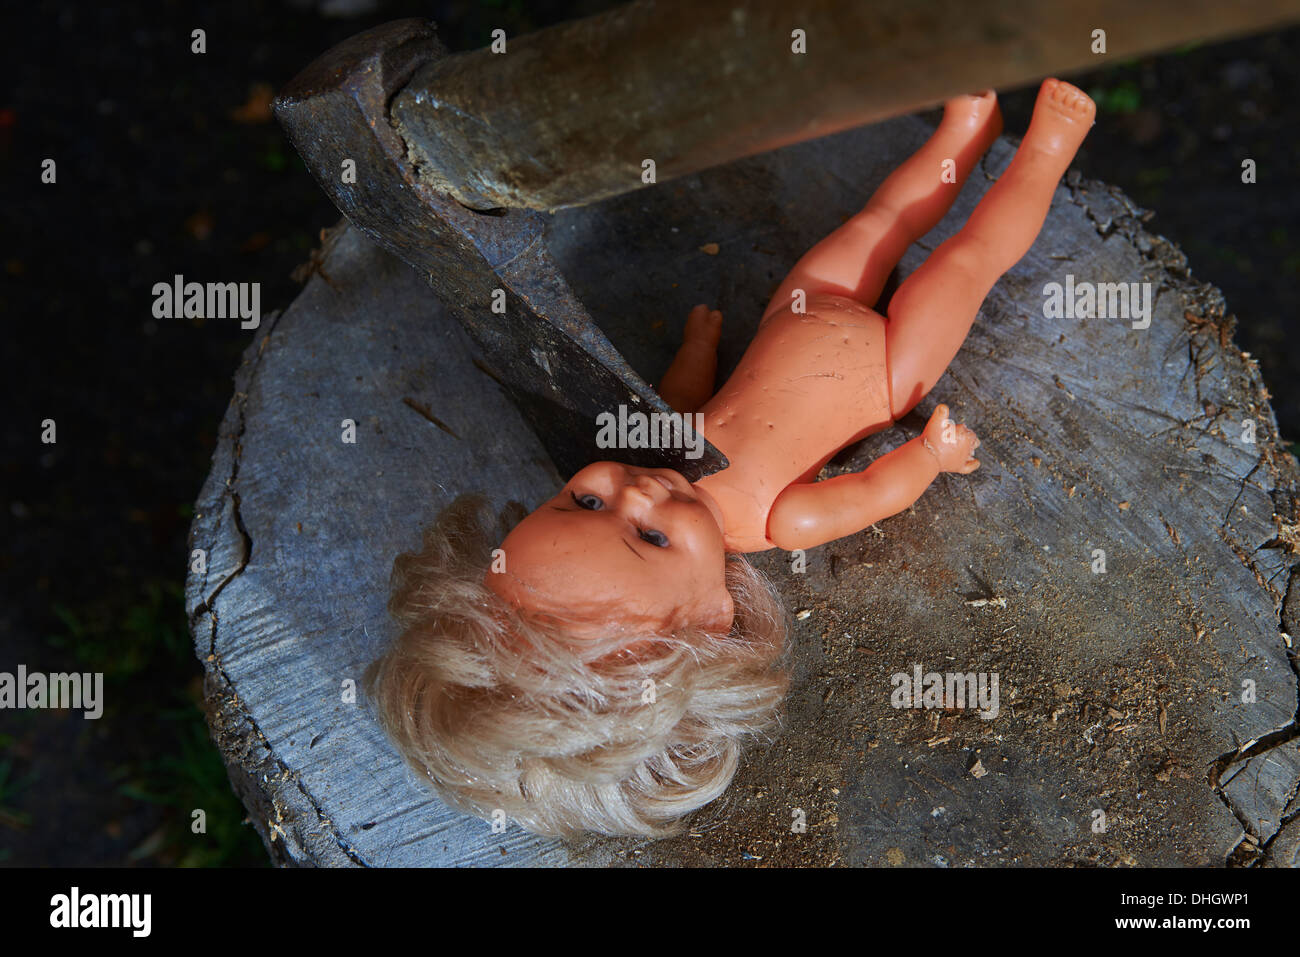 Execution - murder of child toy plastic baby doll with an ax, beheaded Stock Photo